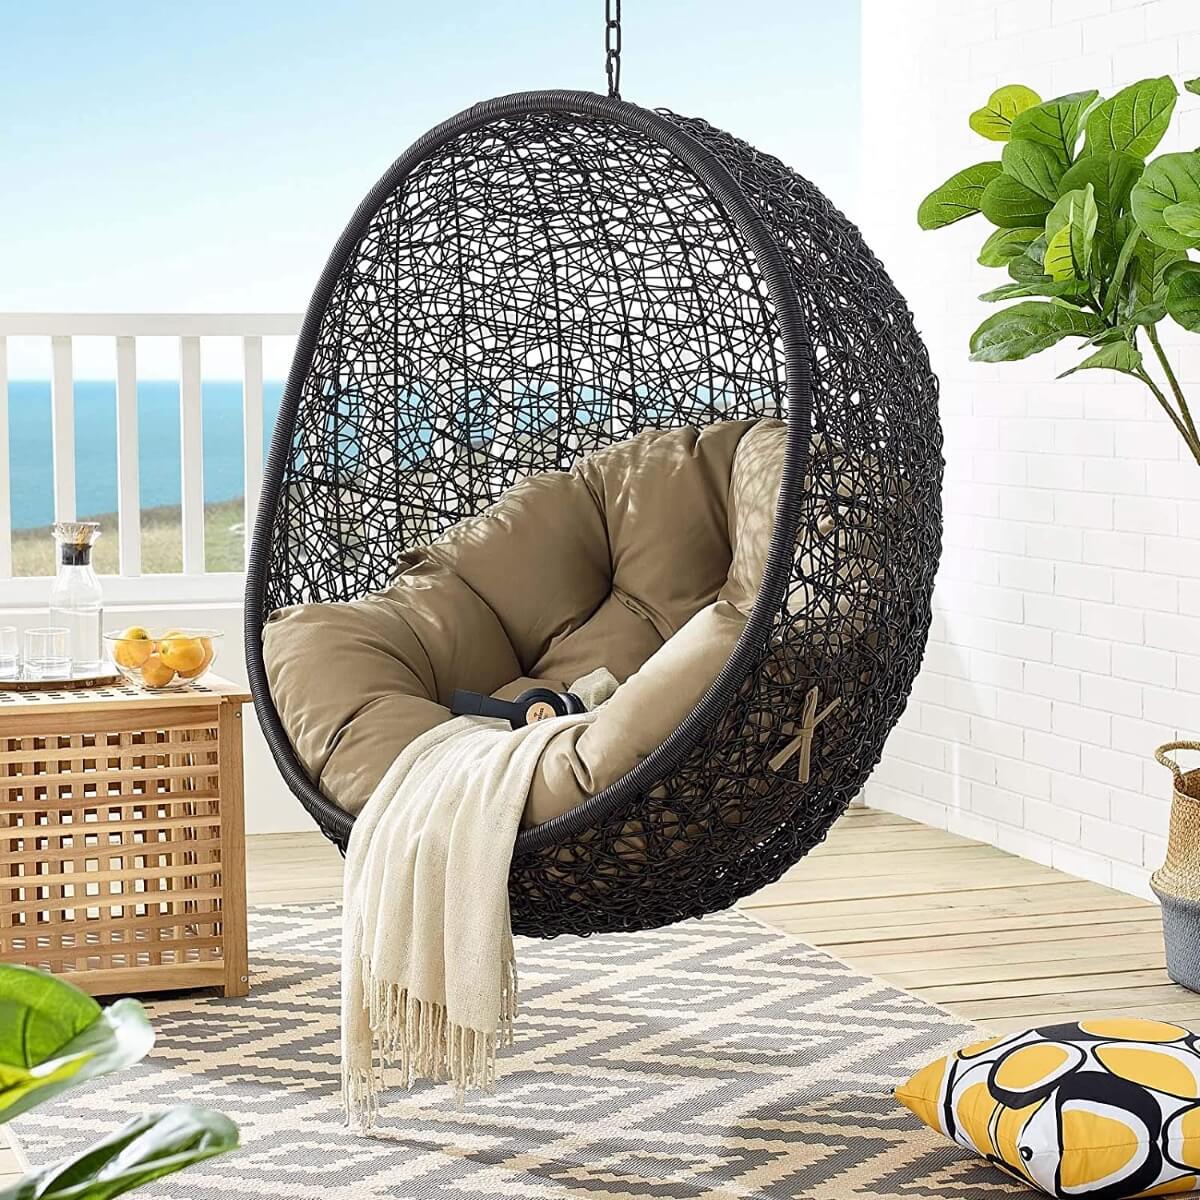 How to Choose The Best Hanging Egg Chairs